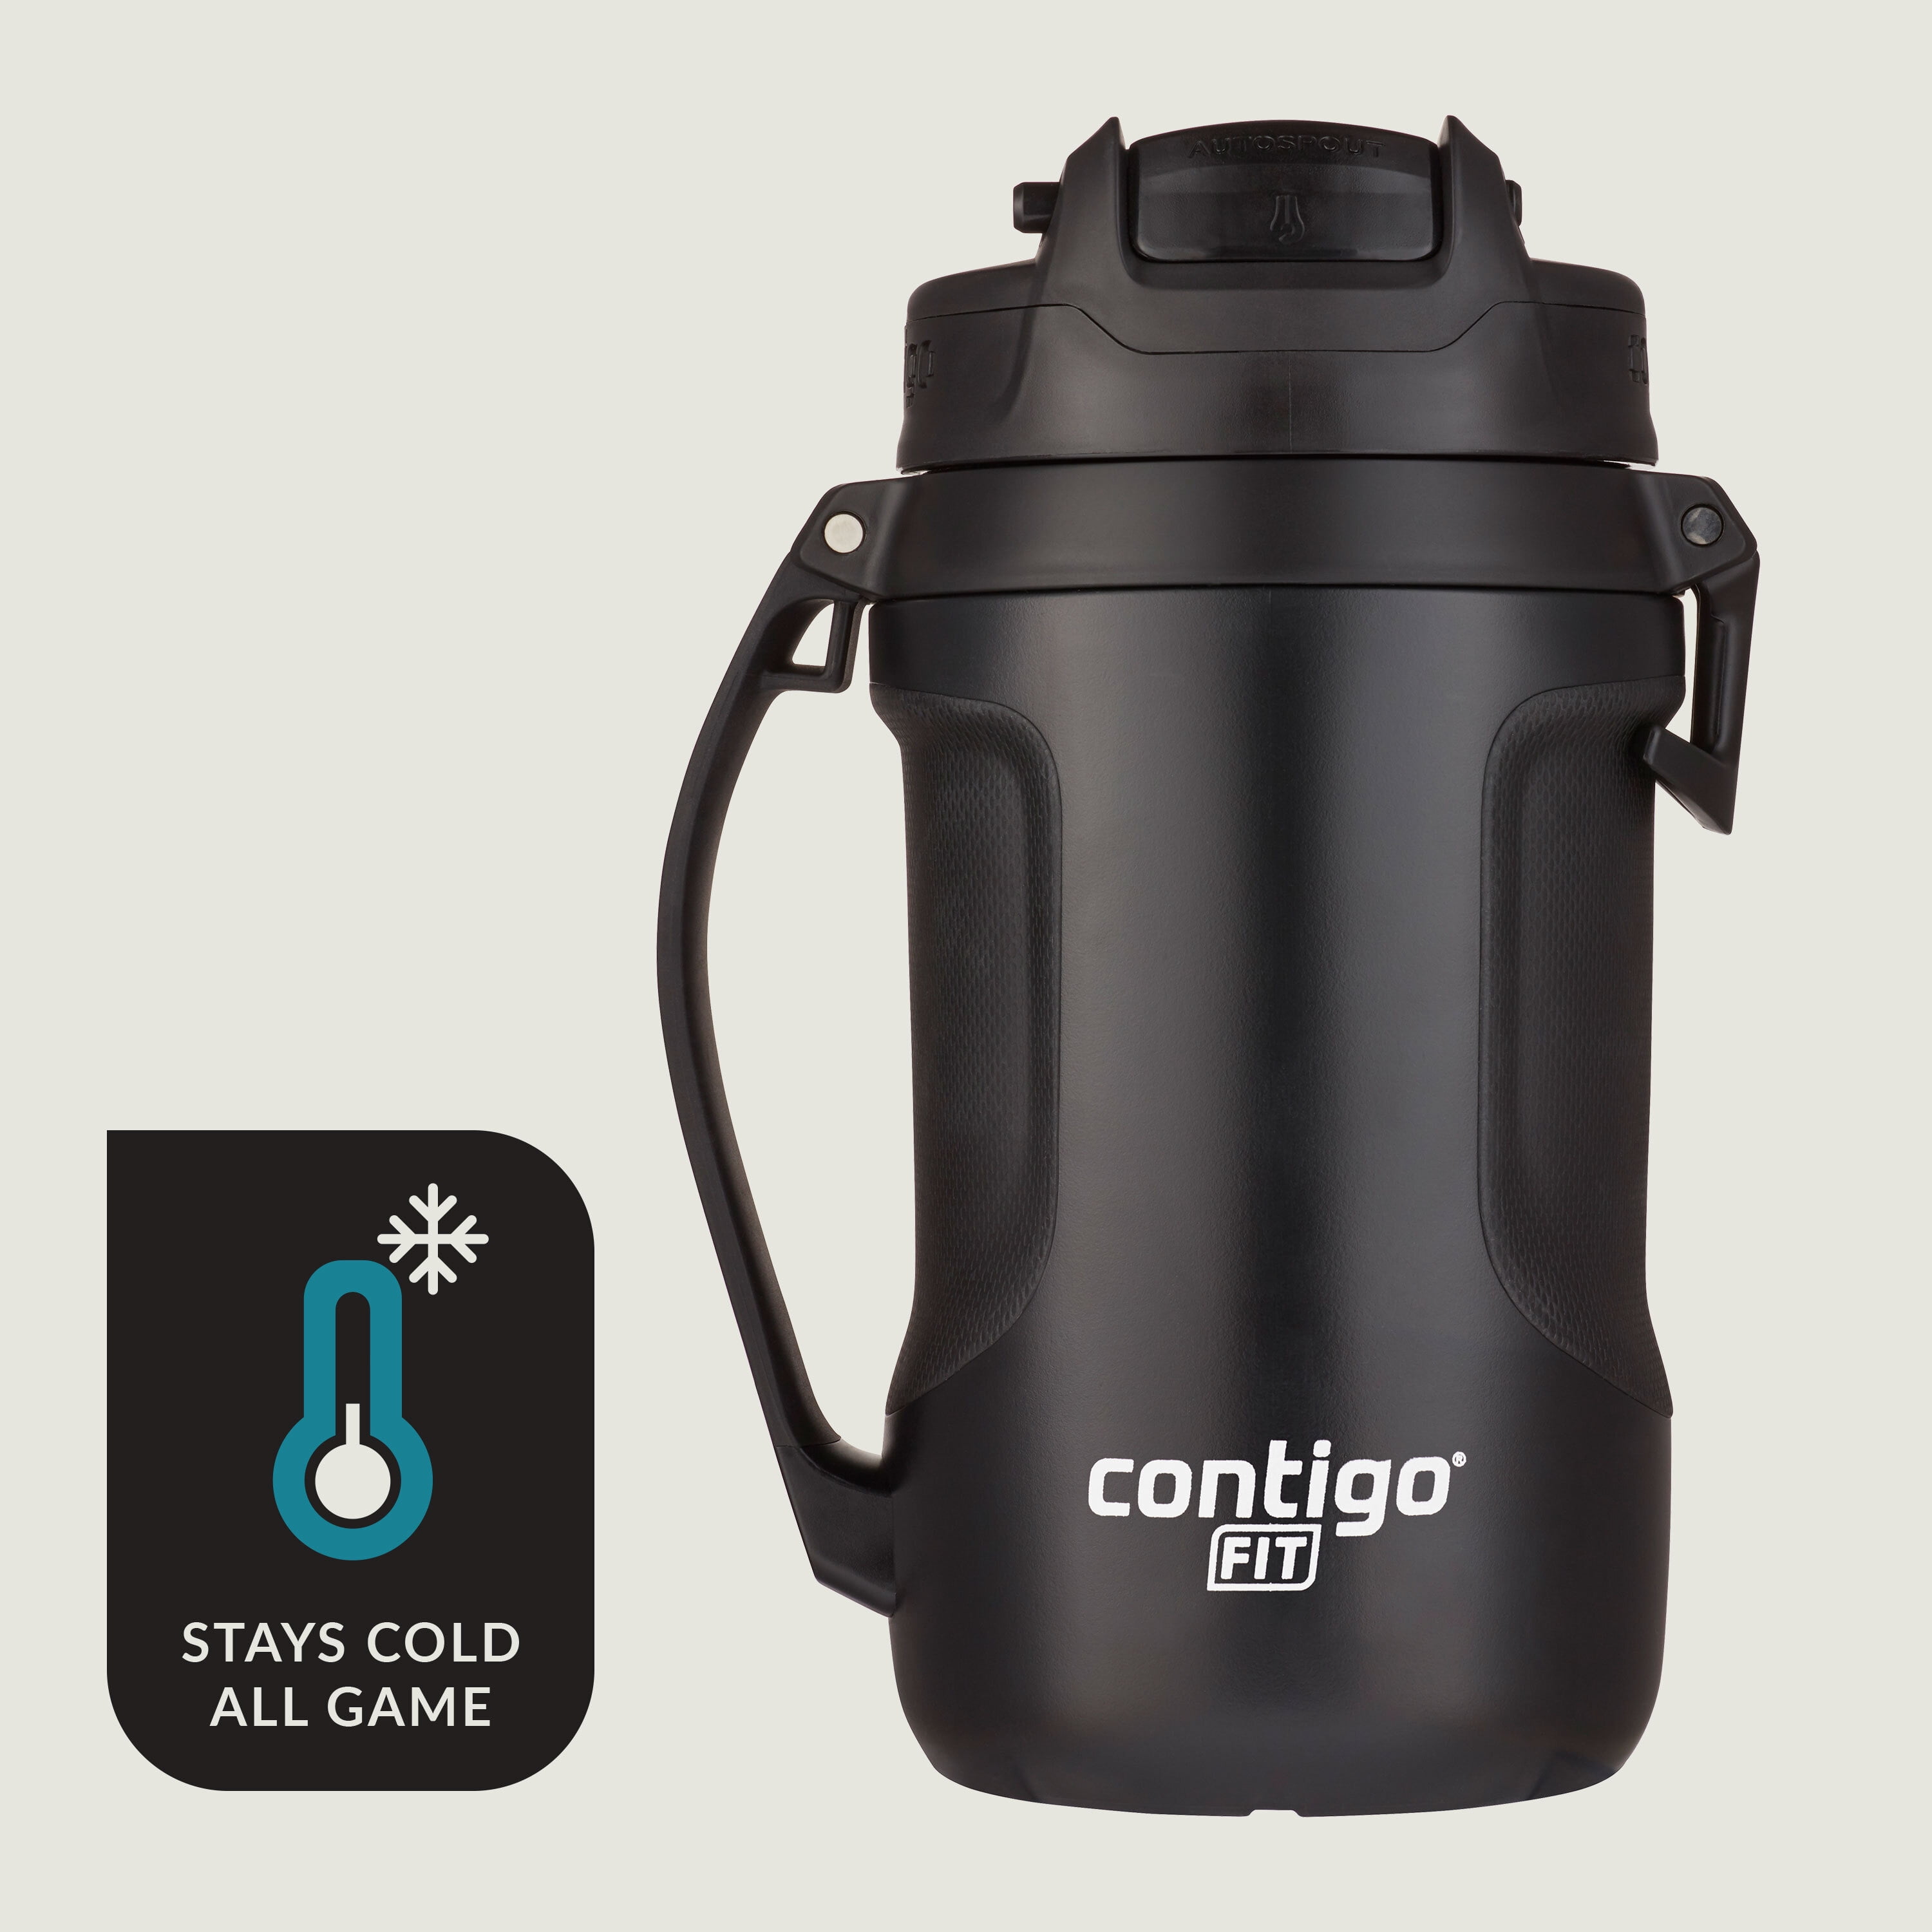 Contigo - Go ahead and crush that workout. With Contigo Fit's spout cover,  you can focus on your reps knowing your water bottle spout is protected.